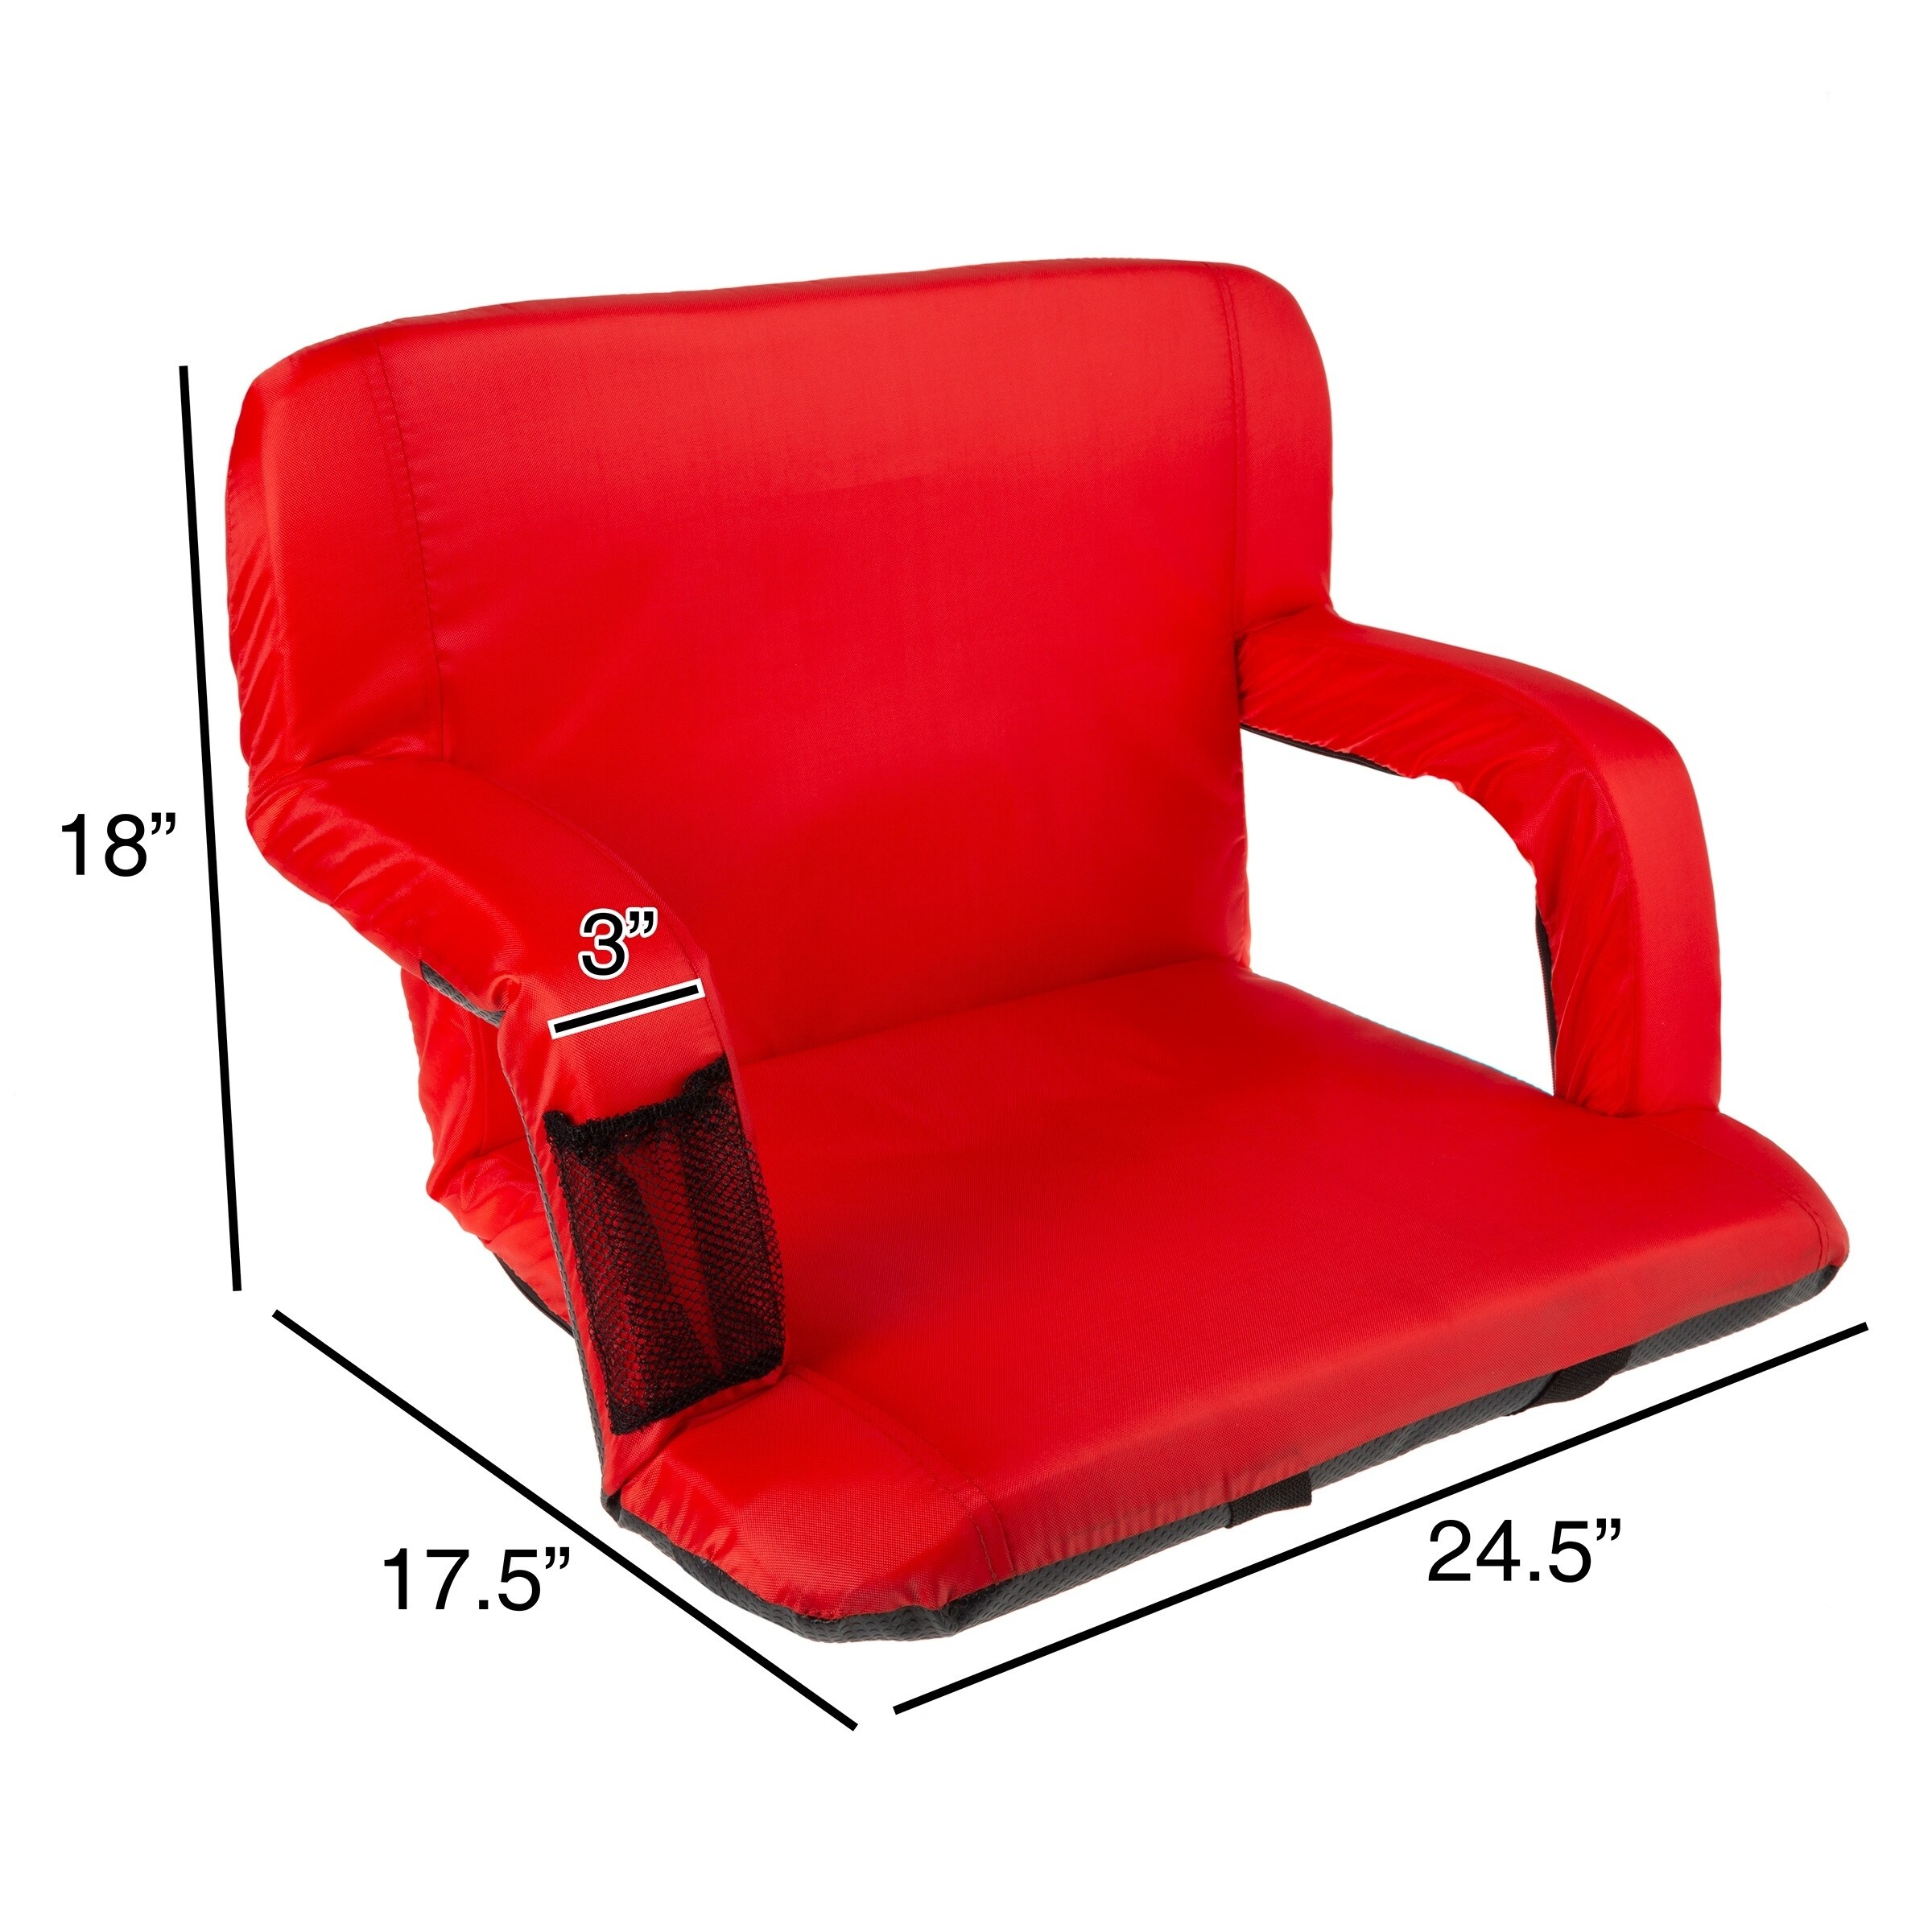 https://ak1.ostkcdn.com/images/products/24232575/Wide-Stadium-Seat-Cushion-6-Reclining-Positions-by-Home-Complete-ee801ef6-7cb5-4d4c-80fe-59859a6983c2.jpg